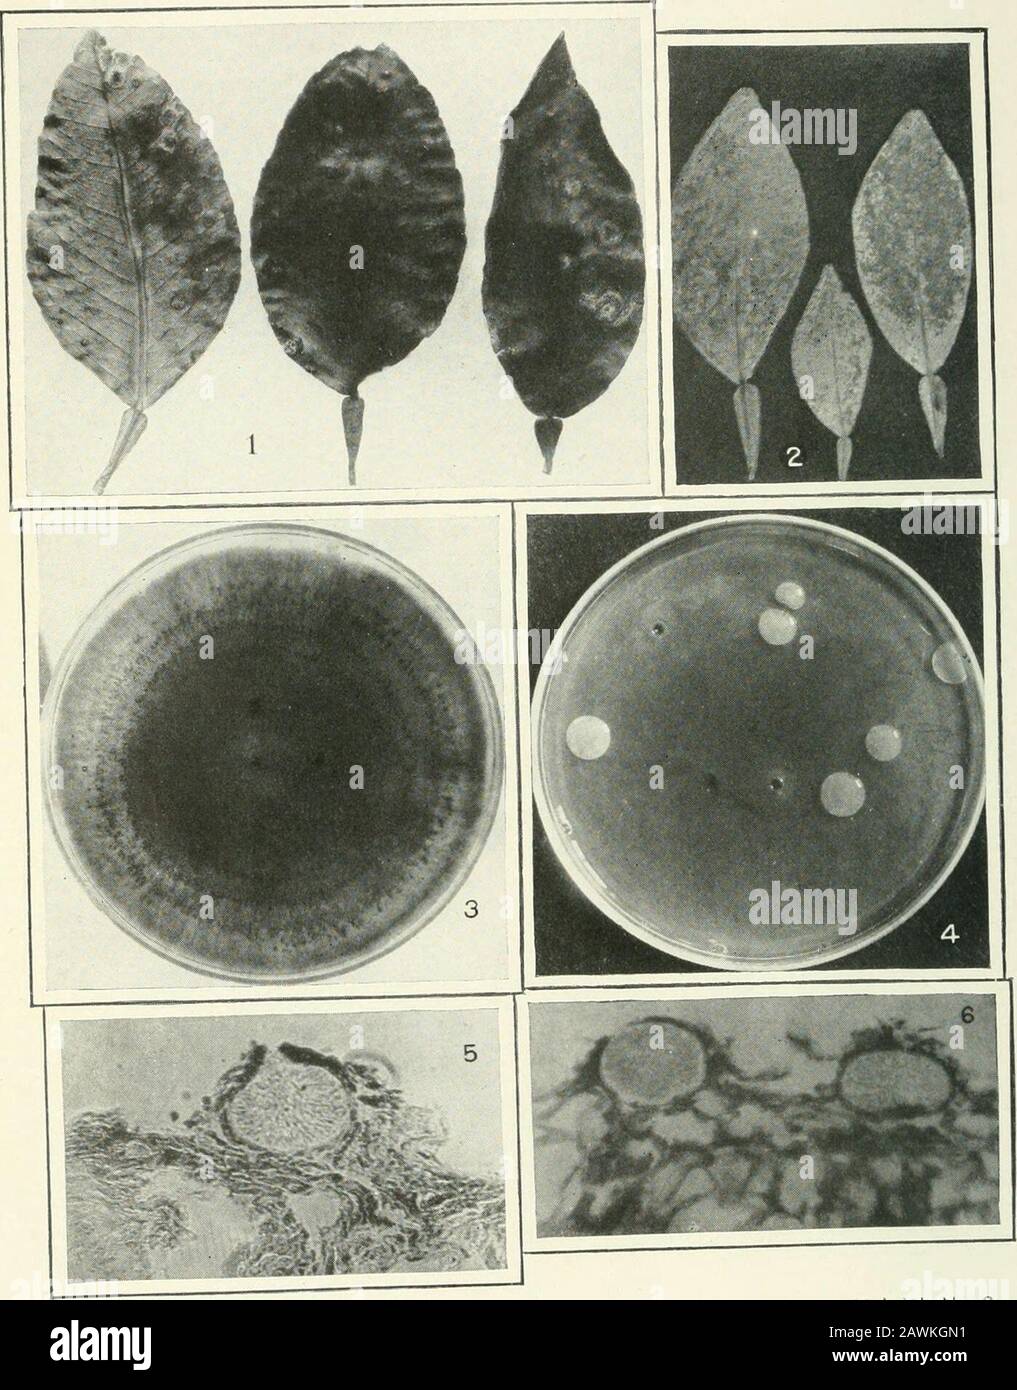 Journal of agricultural research . Journal of Agricultural Research Vol. VI, No.2 Citrus Canker Plate XI. Journal of Agricultural Research Vol. VI, No. 2 PLATE XI Fig. I.—Cankers on old grapefruit leaves which have enlarged during the secondgrowing season. Fig. 2.—Citrus canker resulting from immersion of leaves in a bacterial suspension.Lesions involving a large part of the lower leaf surface are thus formed. Fig. 3.—Culture of Phoma socia showing pycnidial formation in concentric rings. Fig. 4.—Dilution poured plate of Pseudomonas citri on green-bean agar. The spotson the colonies are the re Stock Photo